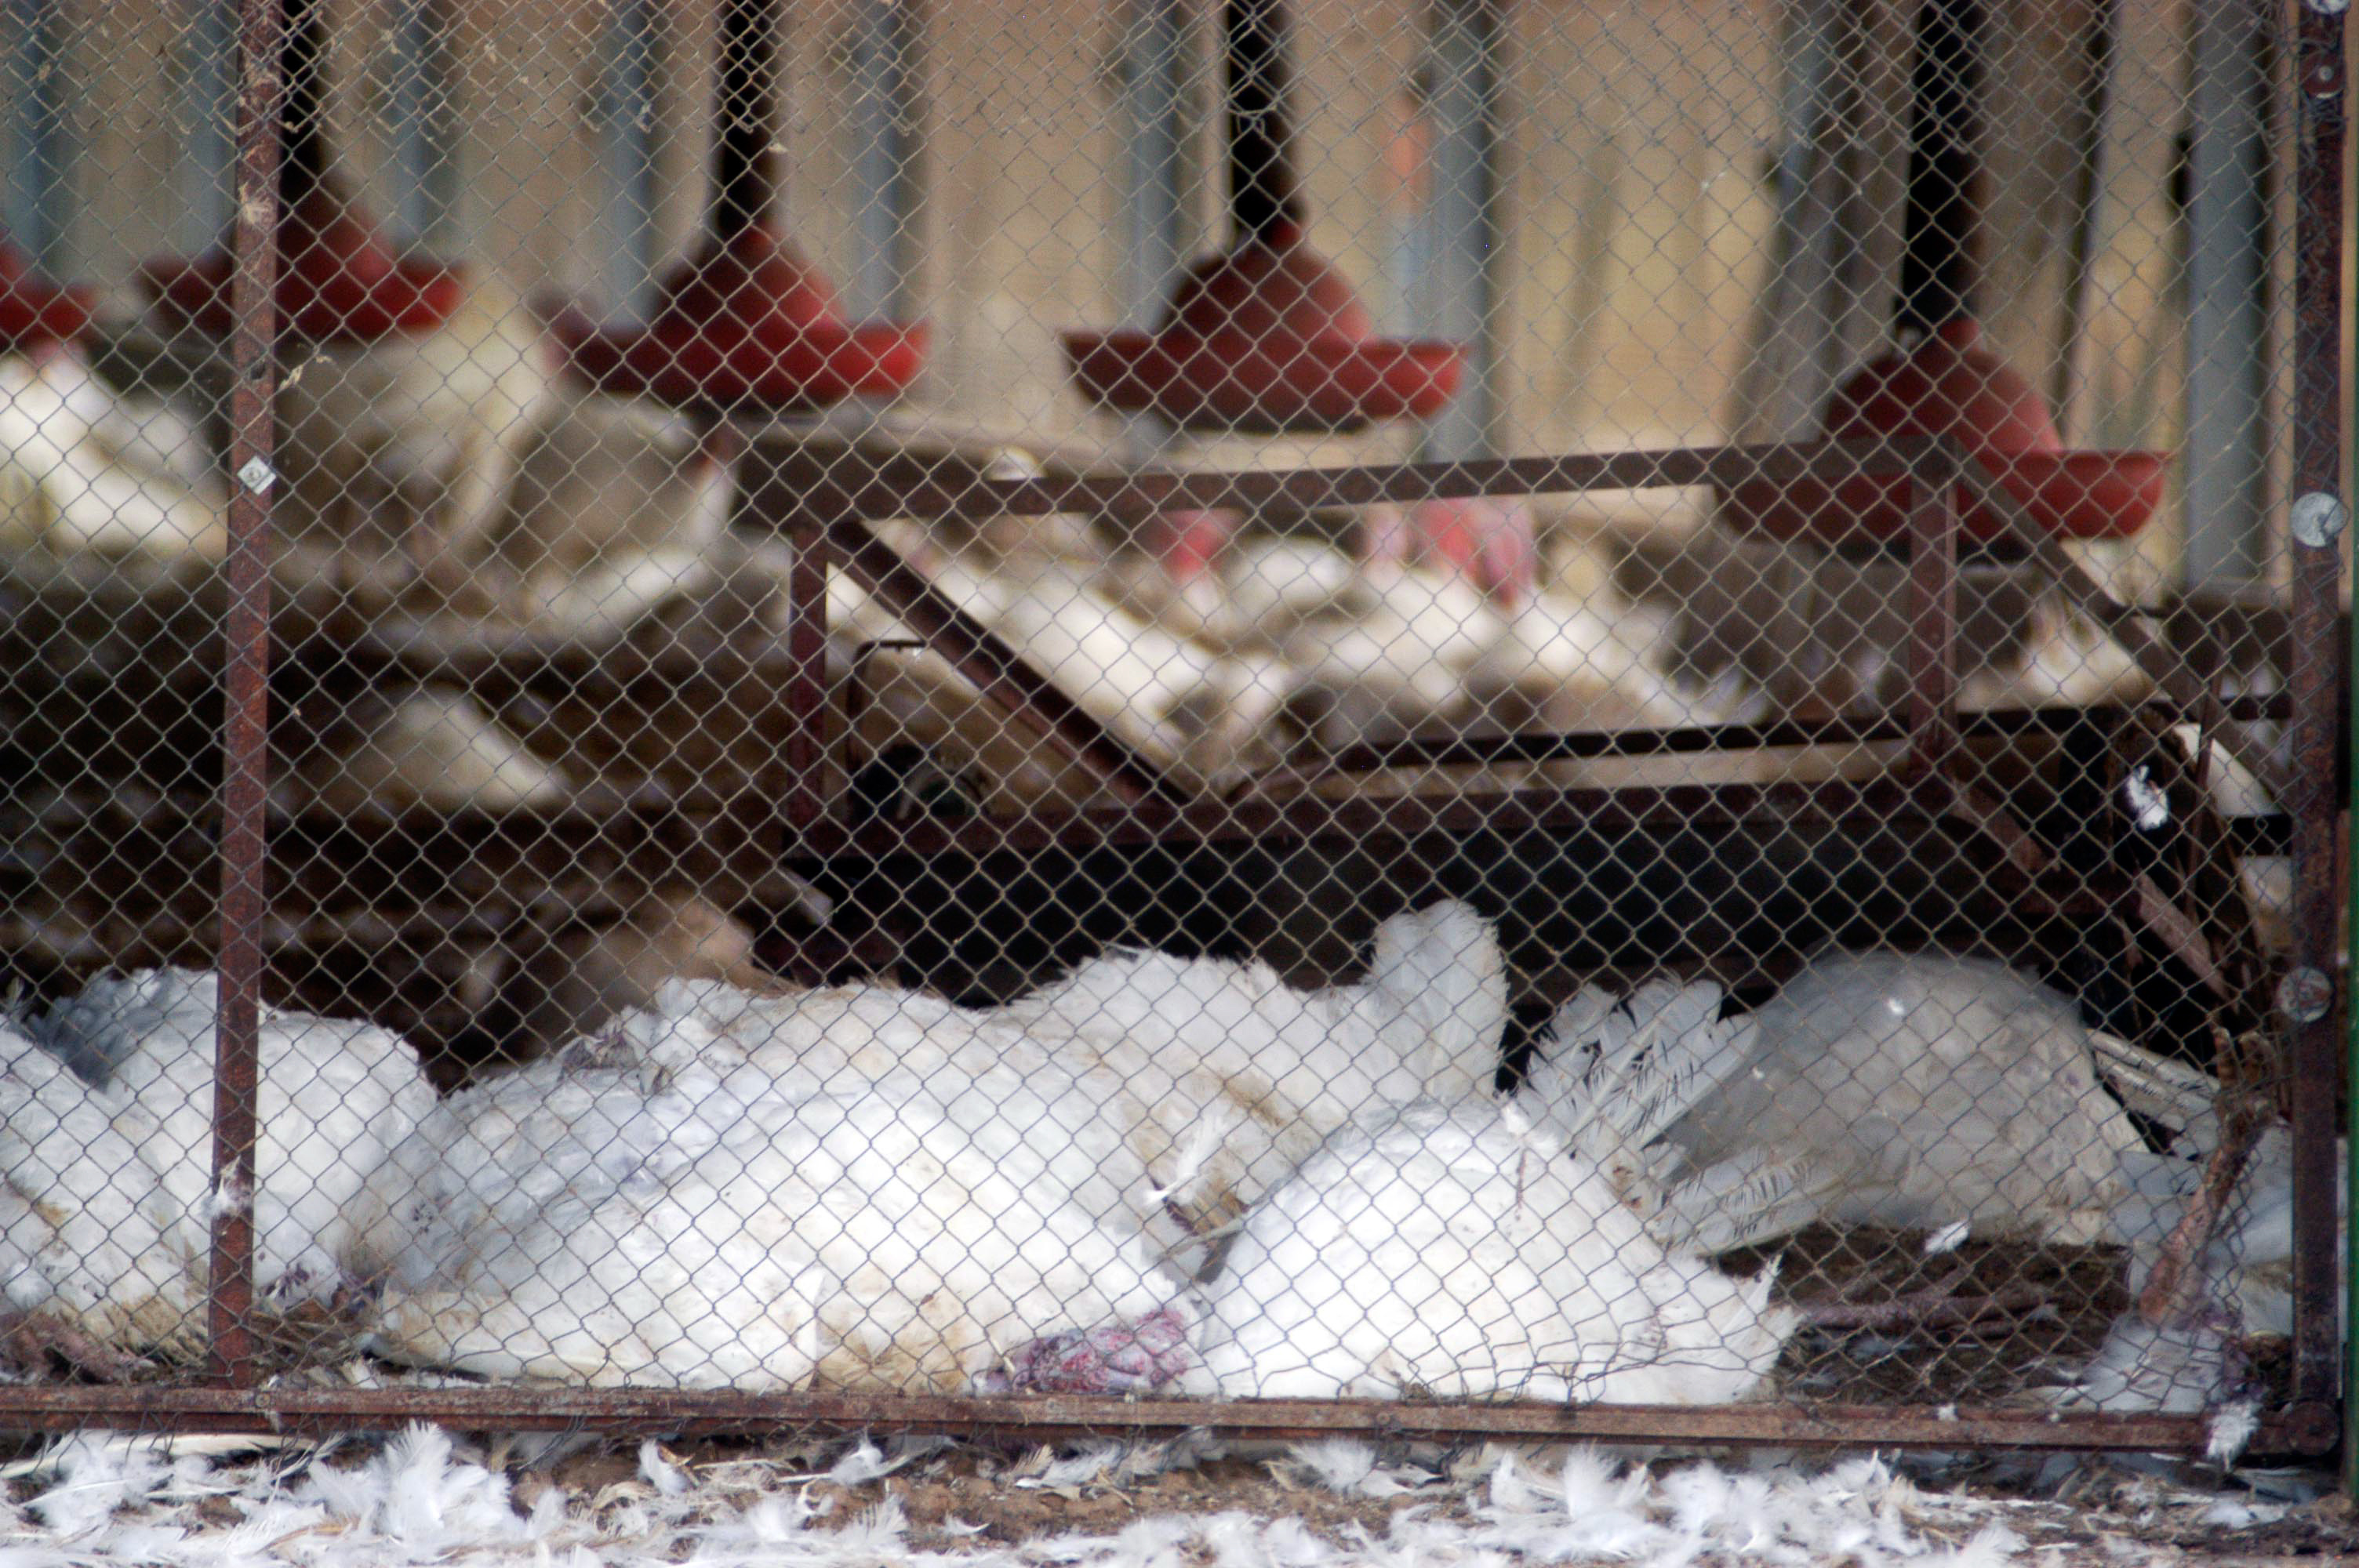 dead chickens in cages